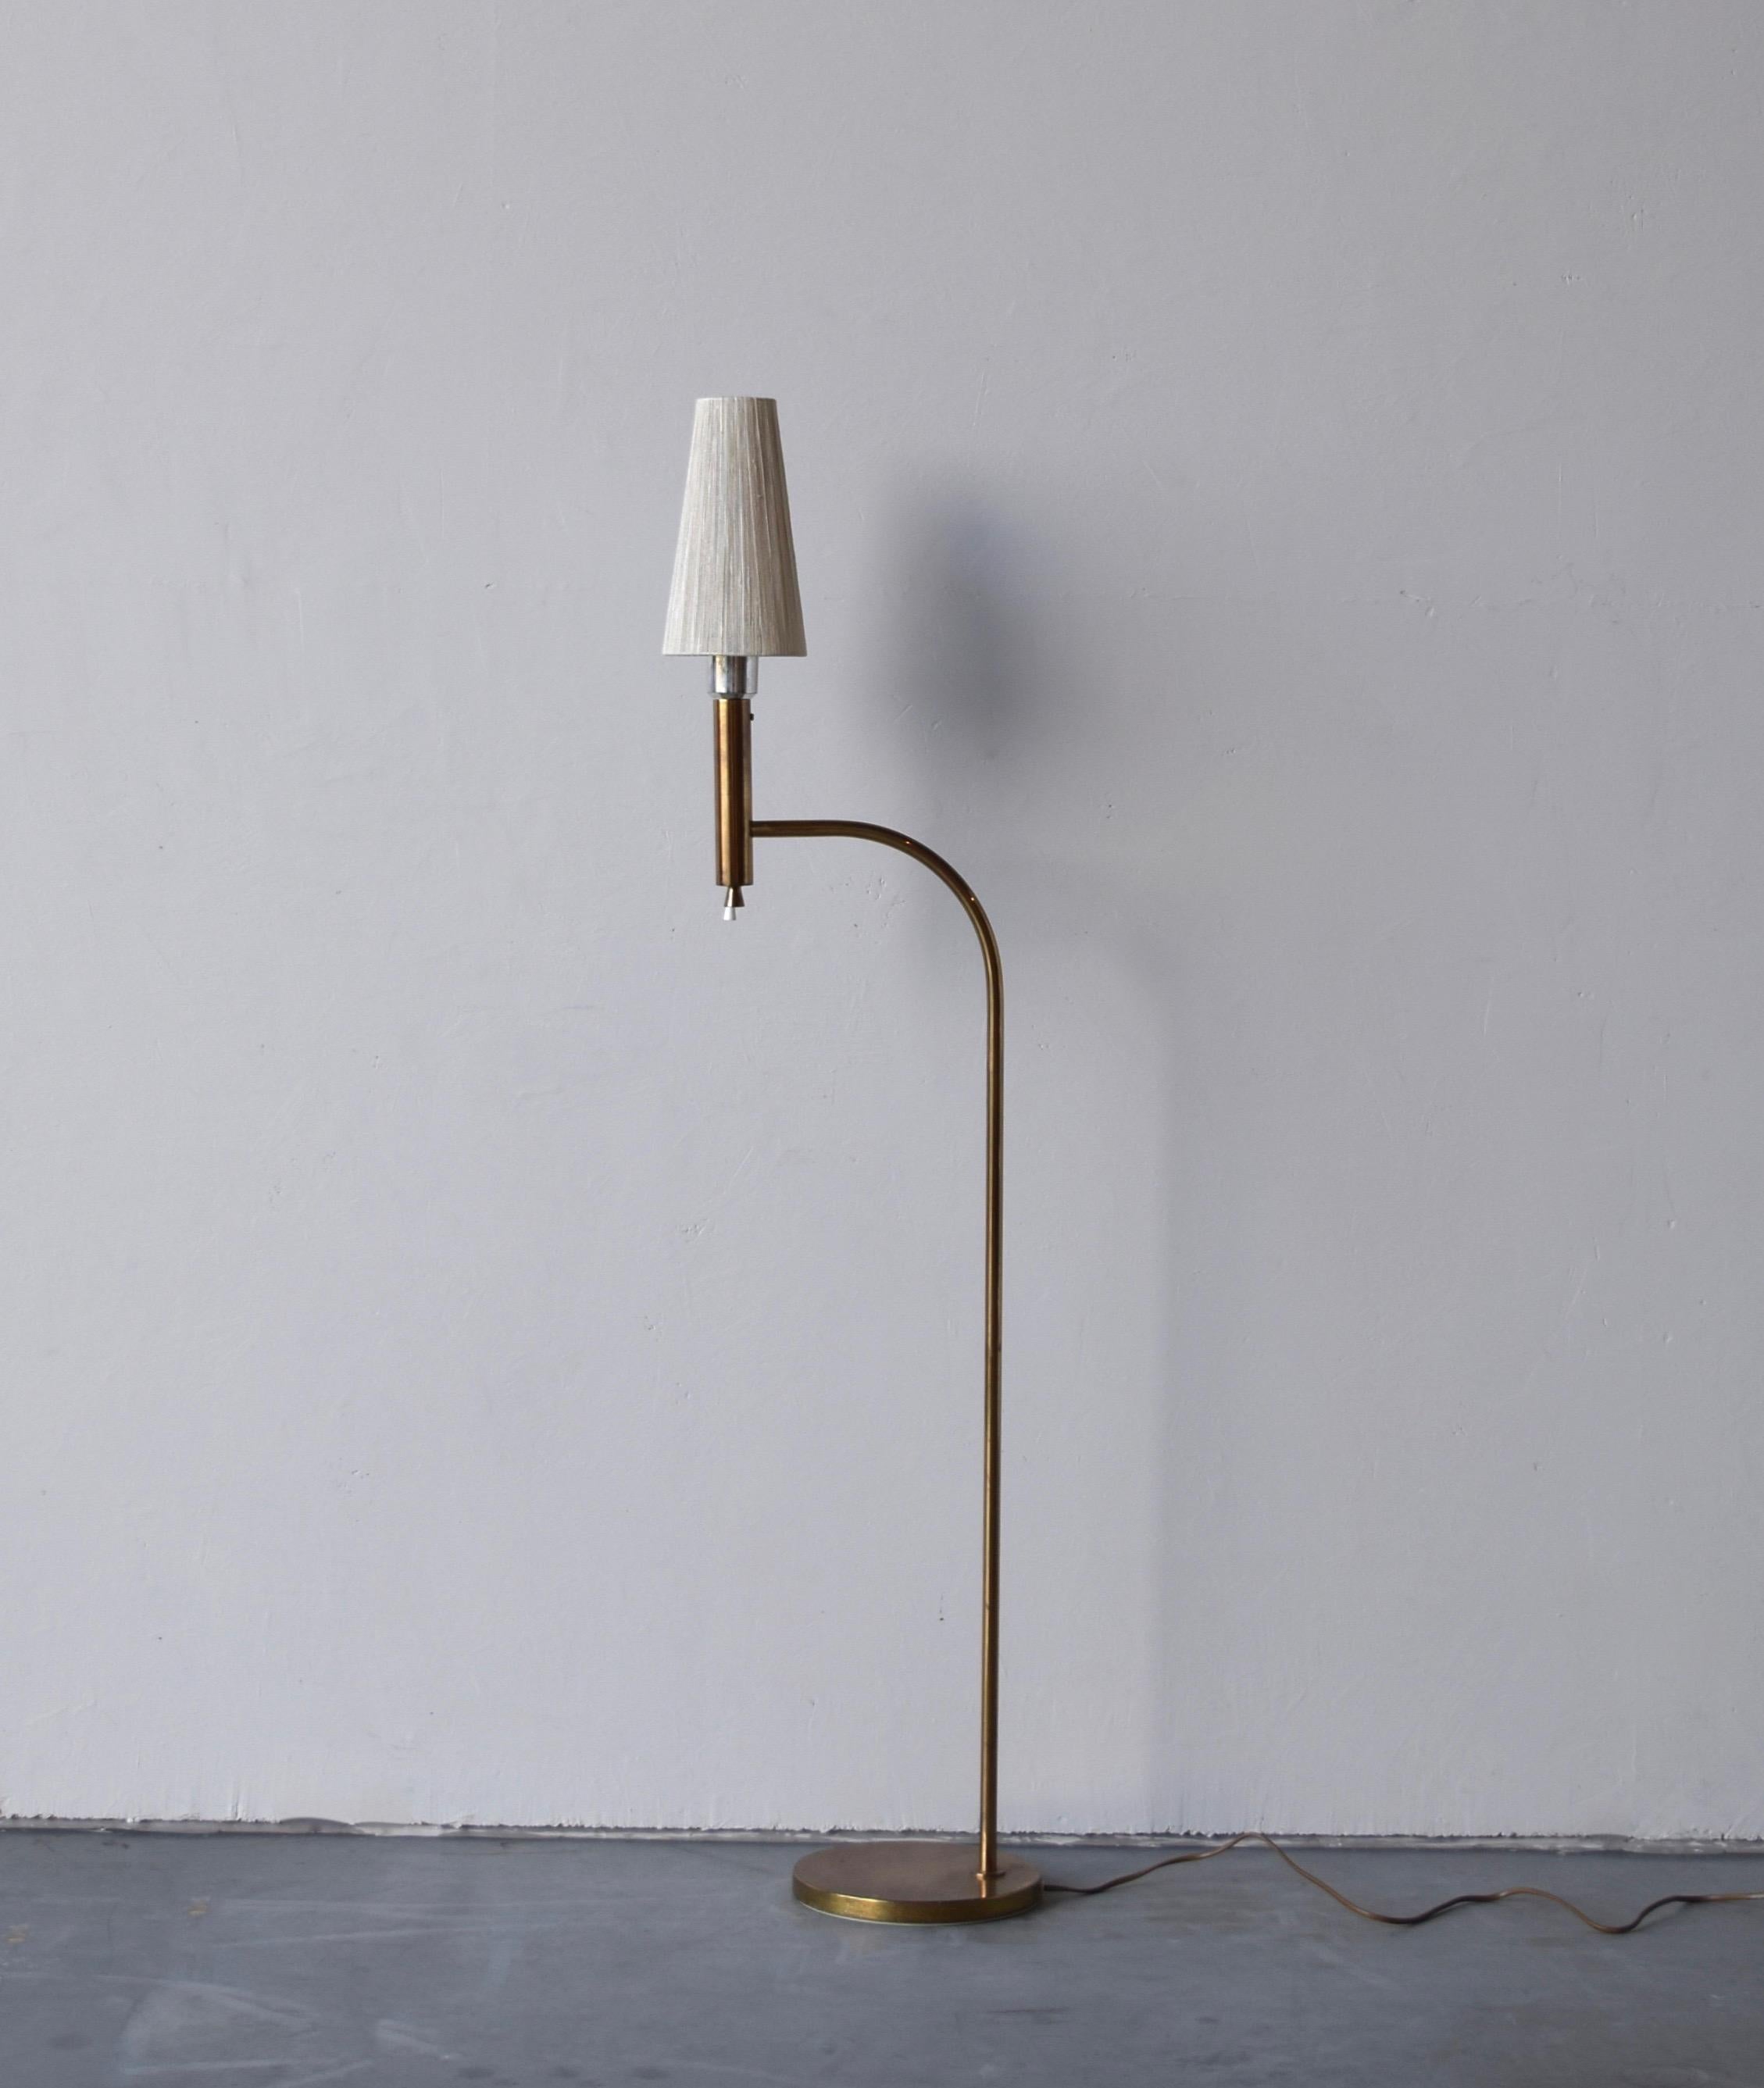 A floor lamp. Designed and produced by Bergboms, Sweden, c. 1970s. Vintage string lampshade.

Other designers of the period include Paavo Tynell, Hans Bergström, Josef Frank, and Kaare Klint.